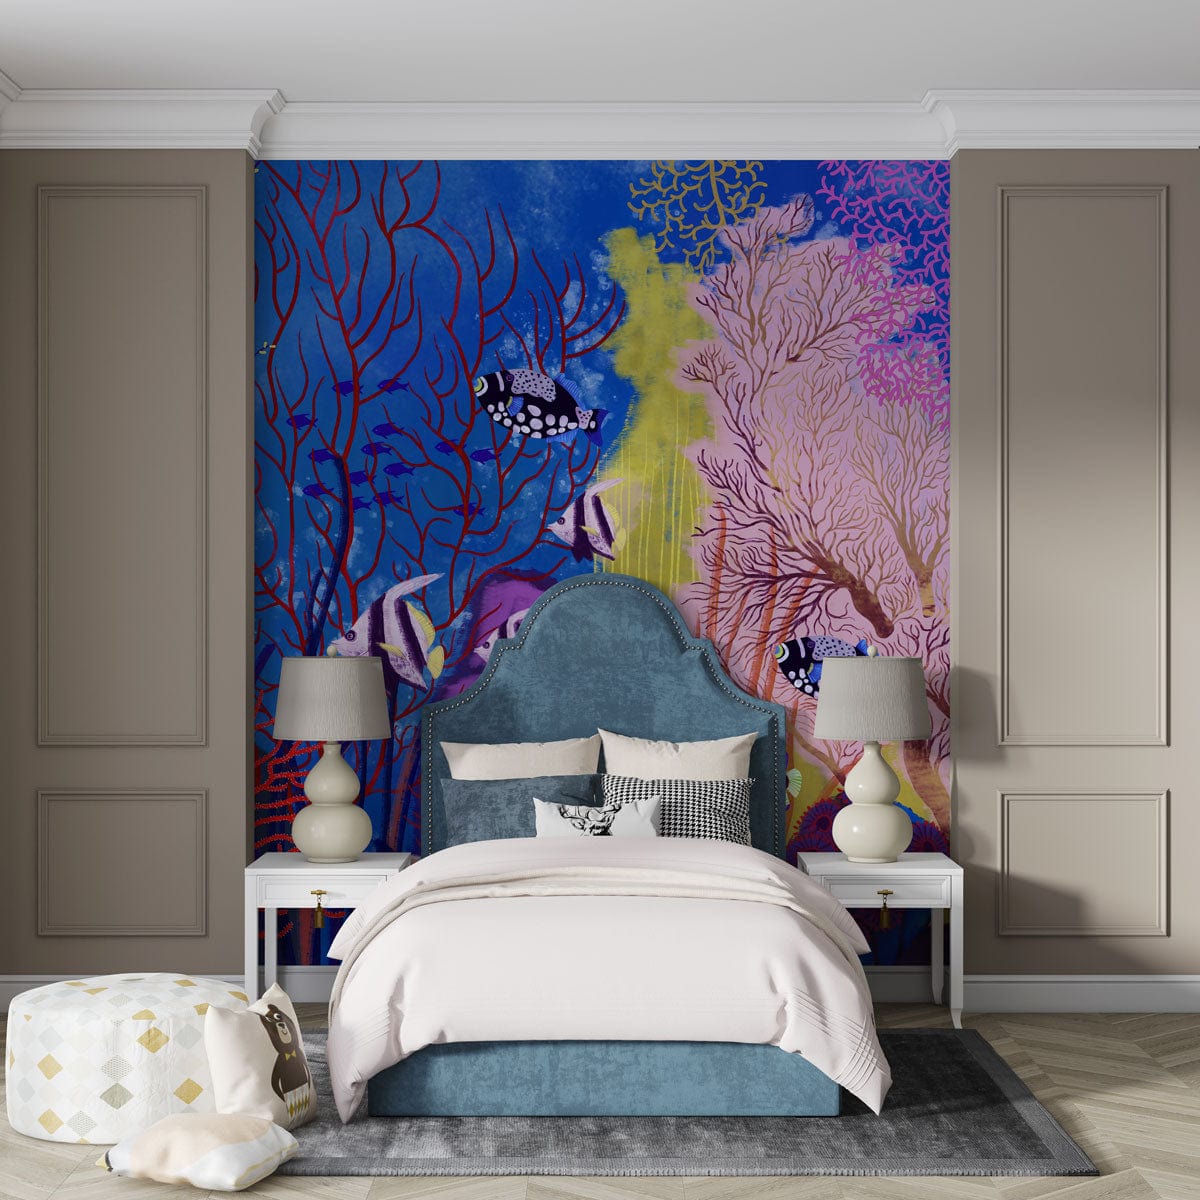 Wallpaper mural featuring a blue ocean ground scene for use in decorating bedrooms